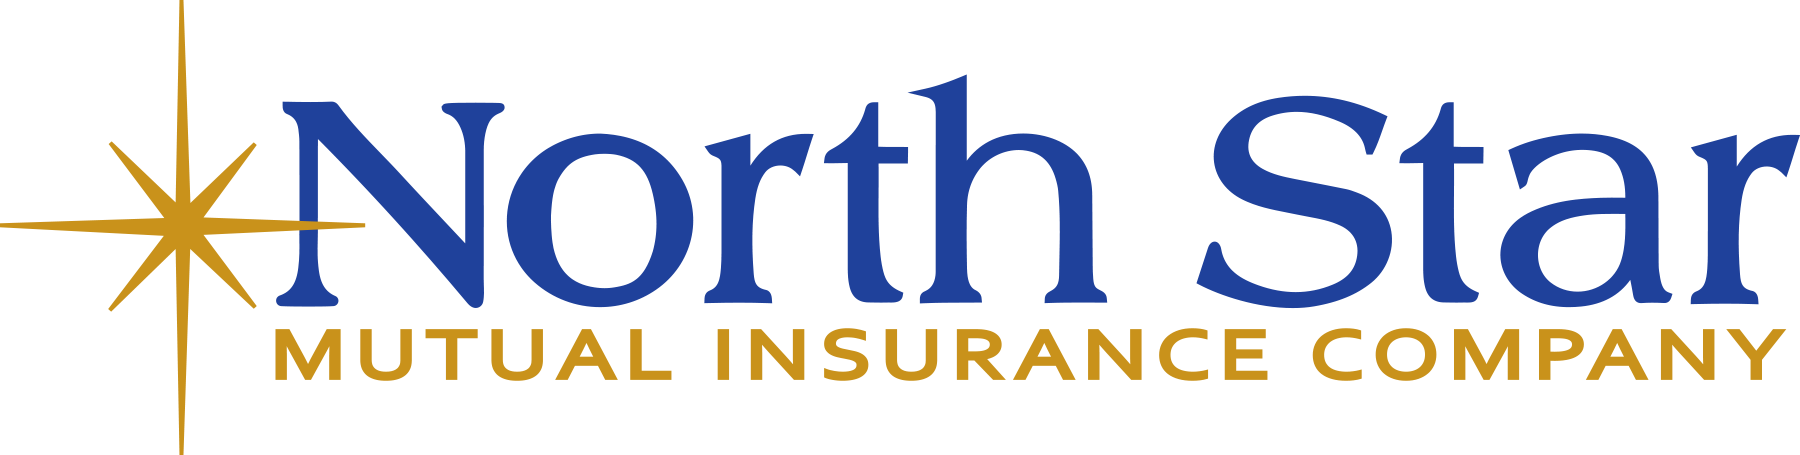 Logo of a company called "North Star Mutual Insurance Company" - first priority insurance